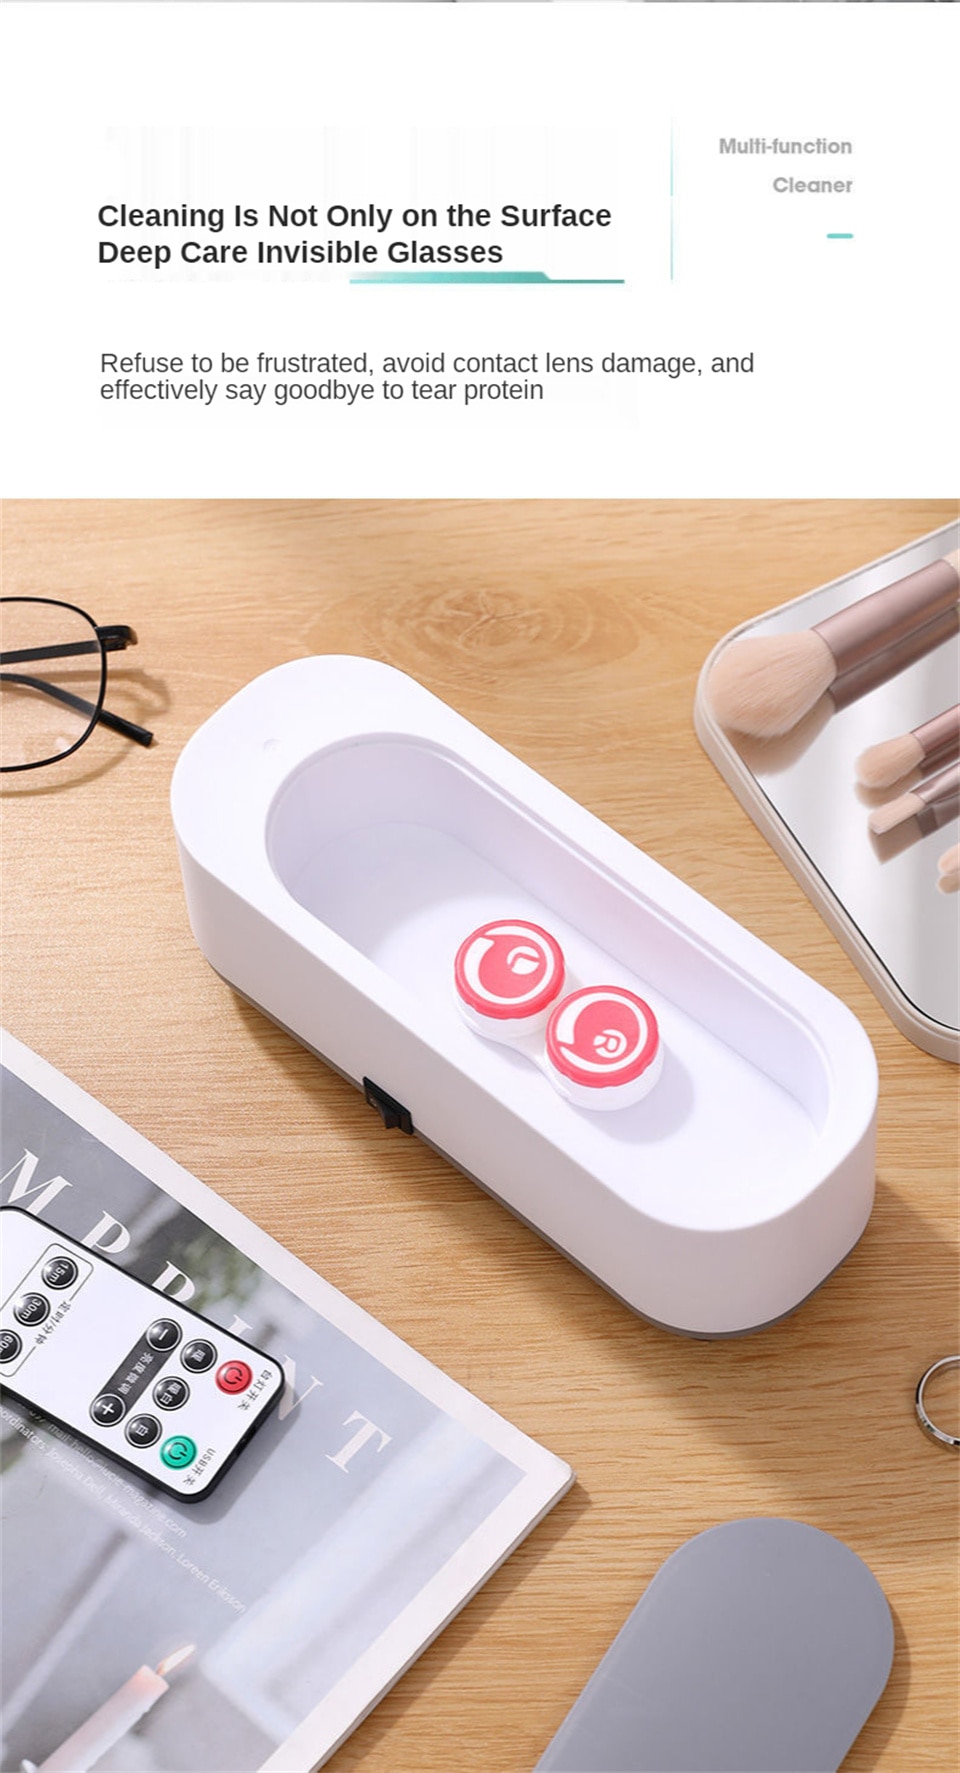 Eraclean Portable Automatic Ultrasonic Jewelry Cleaner for Glasses